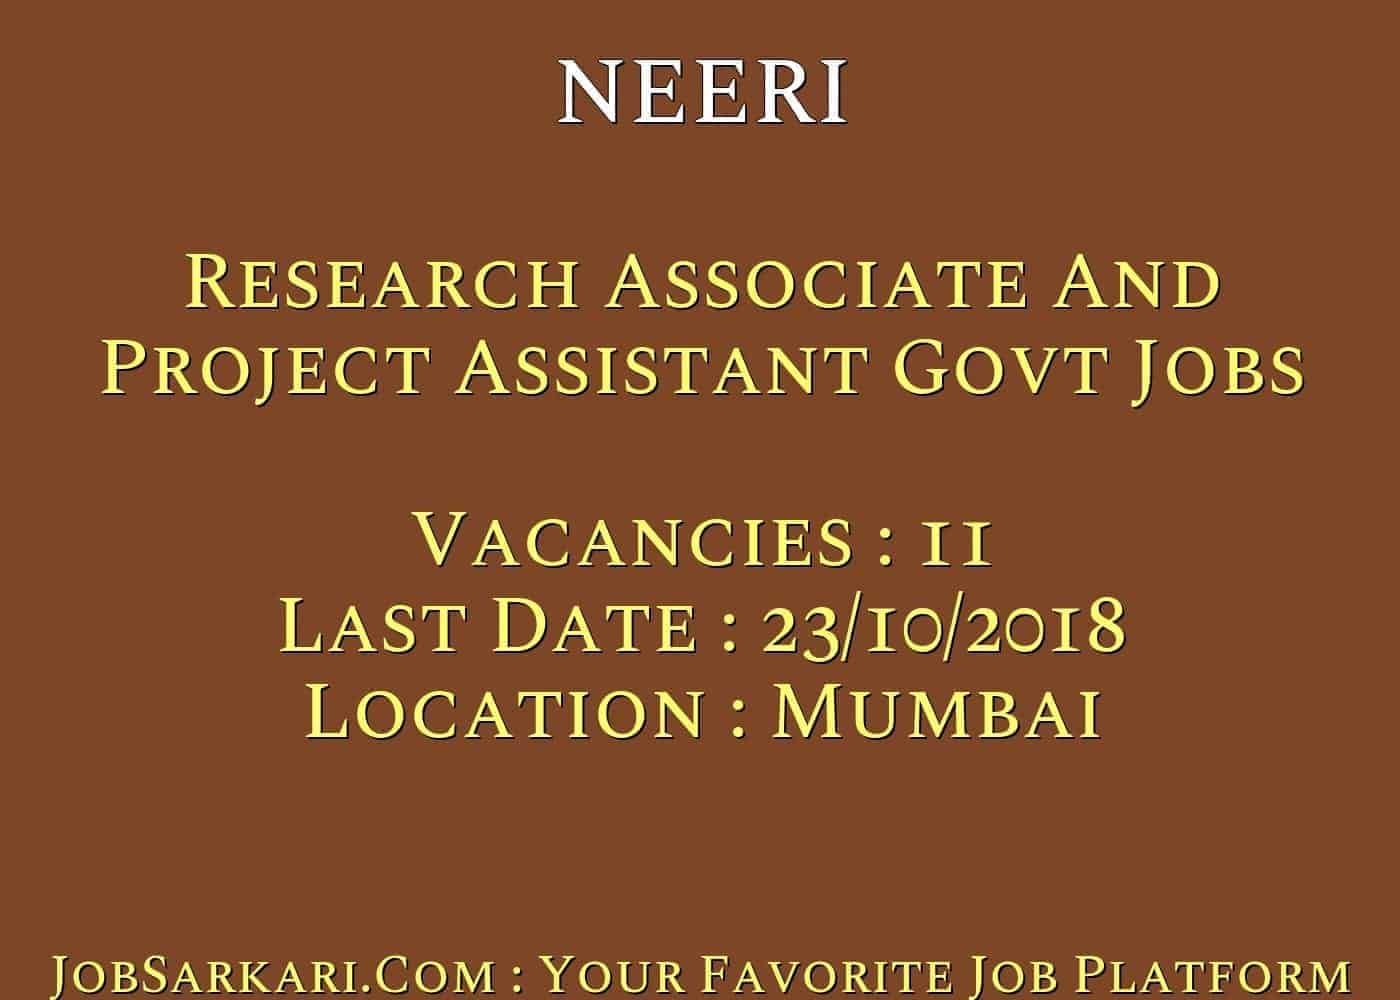 NEERI Recruitment 2018 For Research Associate And Project Assistant Govt Jobs